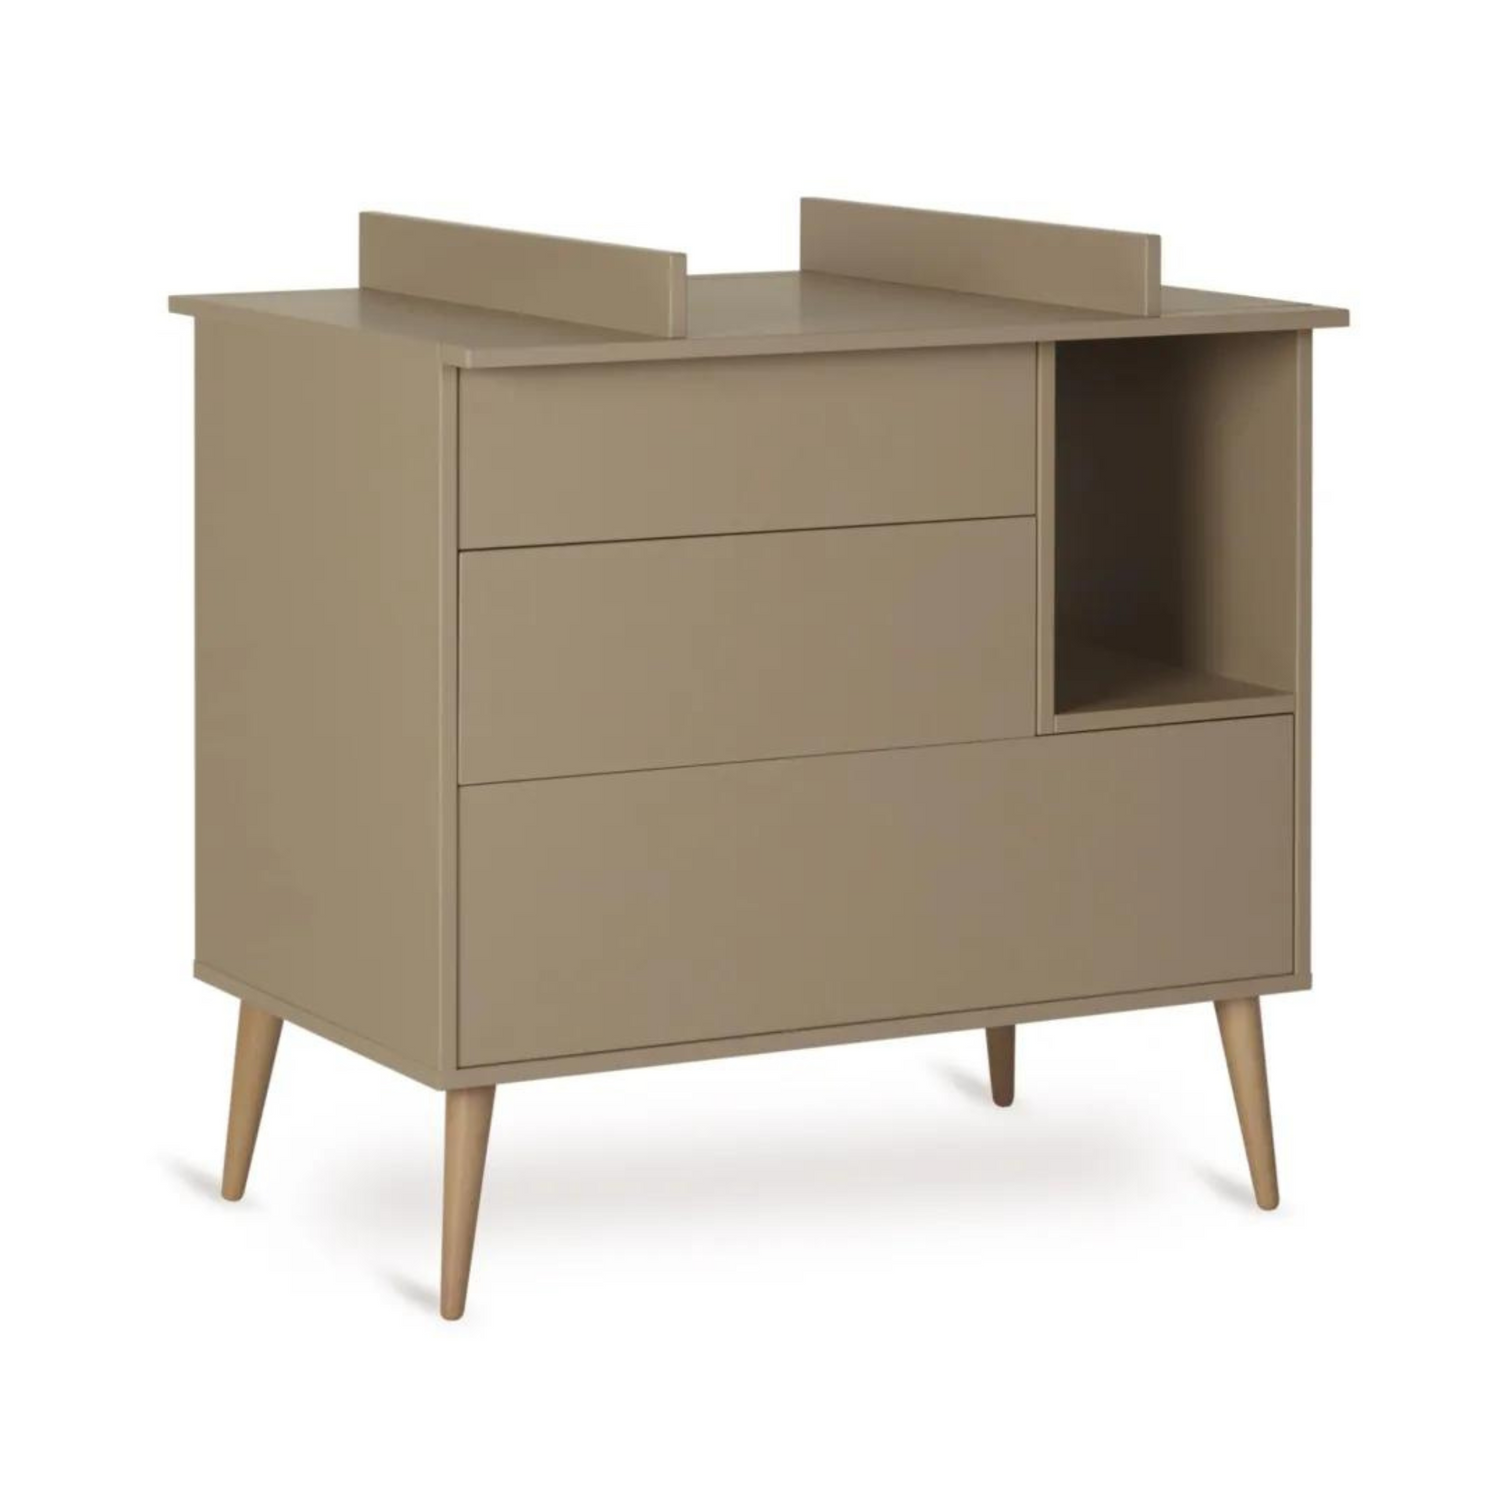 Quax chest of drawers Cocoon Latte